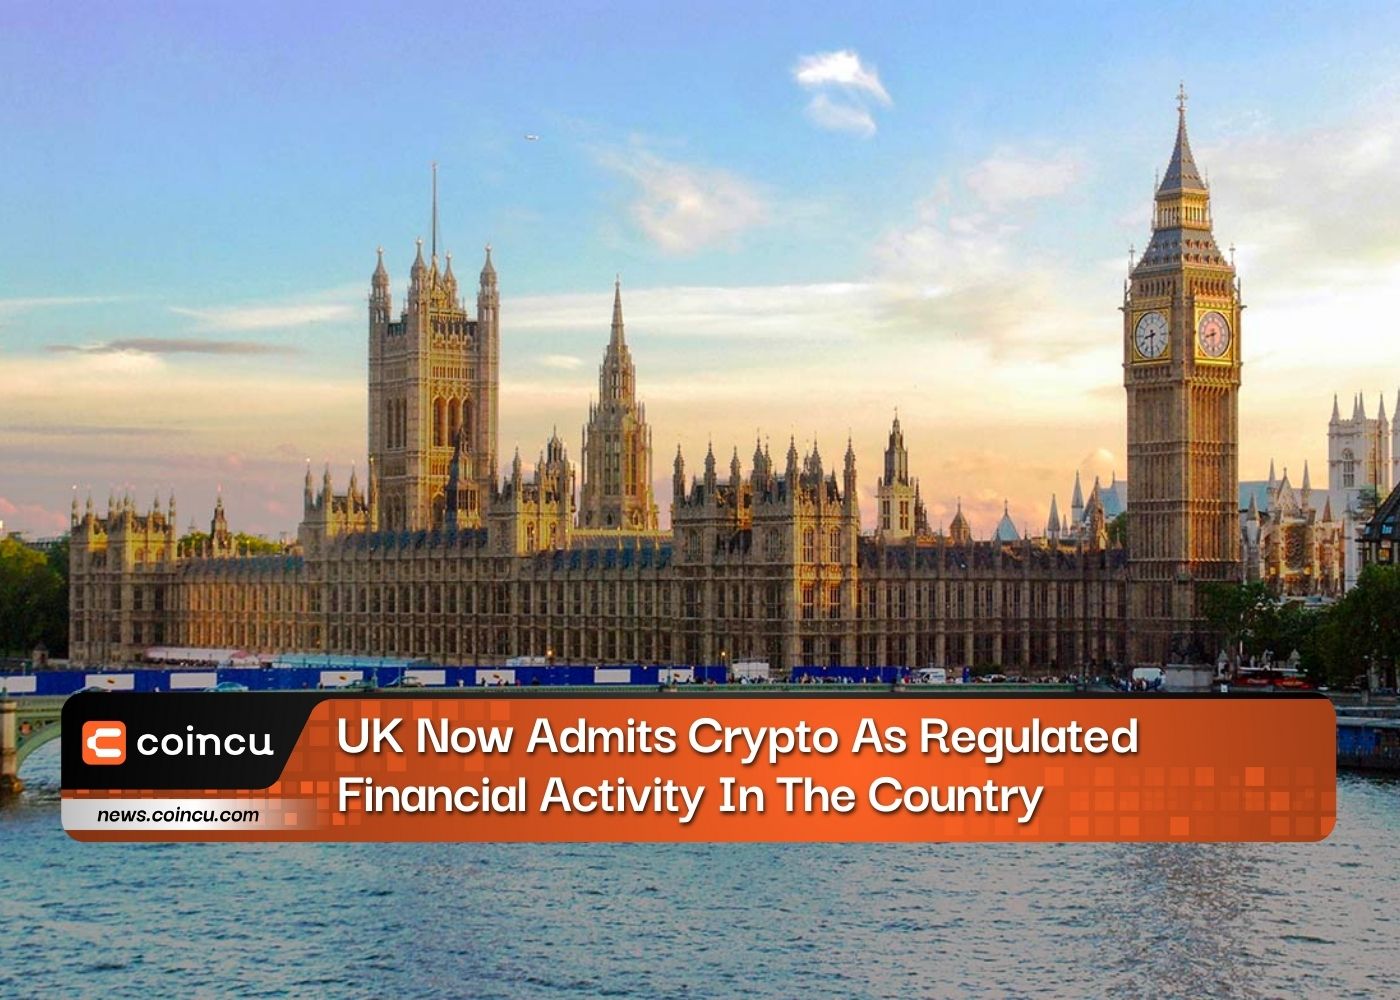 BREAKING: UK Now Admits Crypto As Regulated Financial Activity In The Country